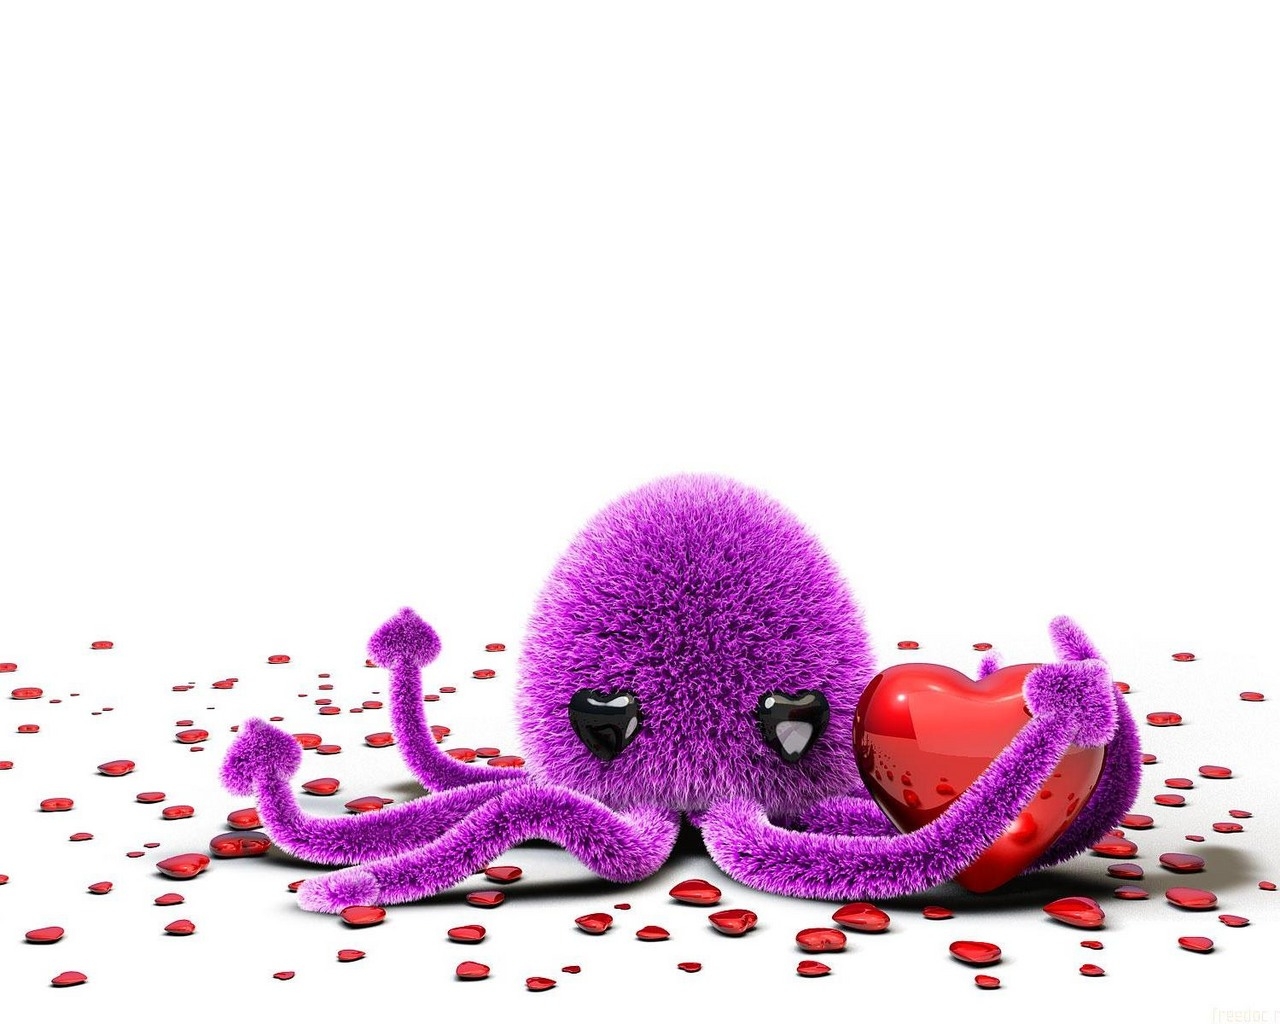 Octopus art love hd artist k wallpapers images backgrounds photos and pictures